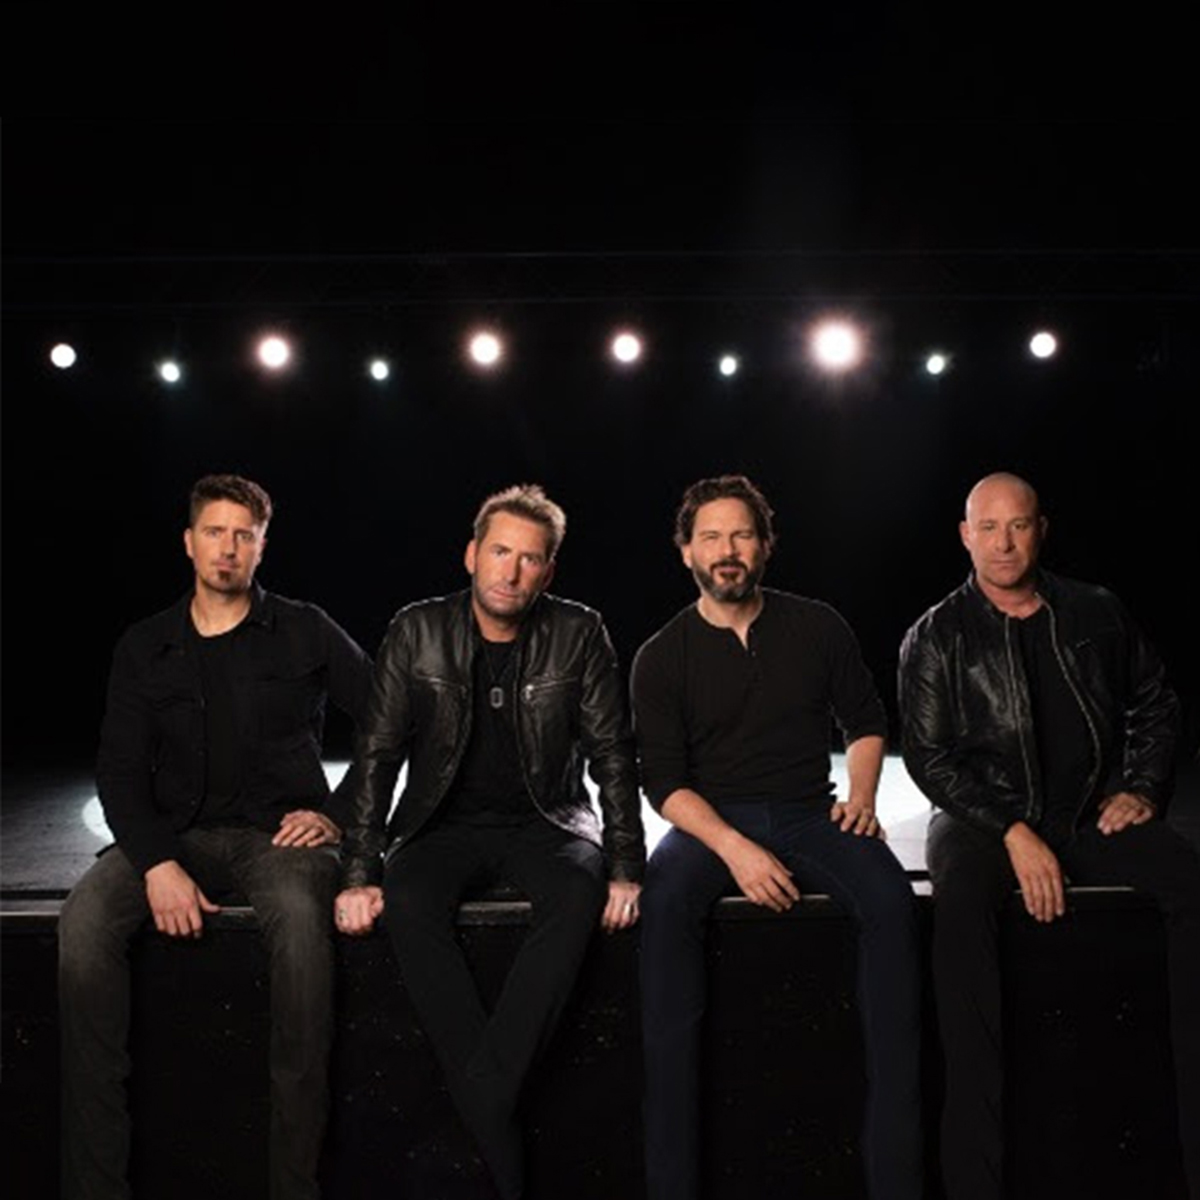 Nickelback Release Music Video For Latest Single “San Quentin”